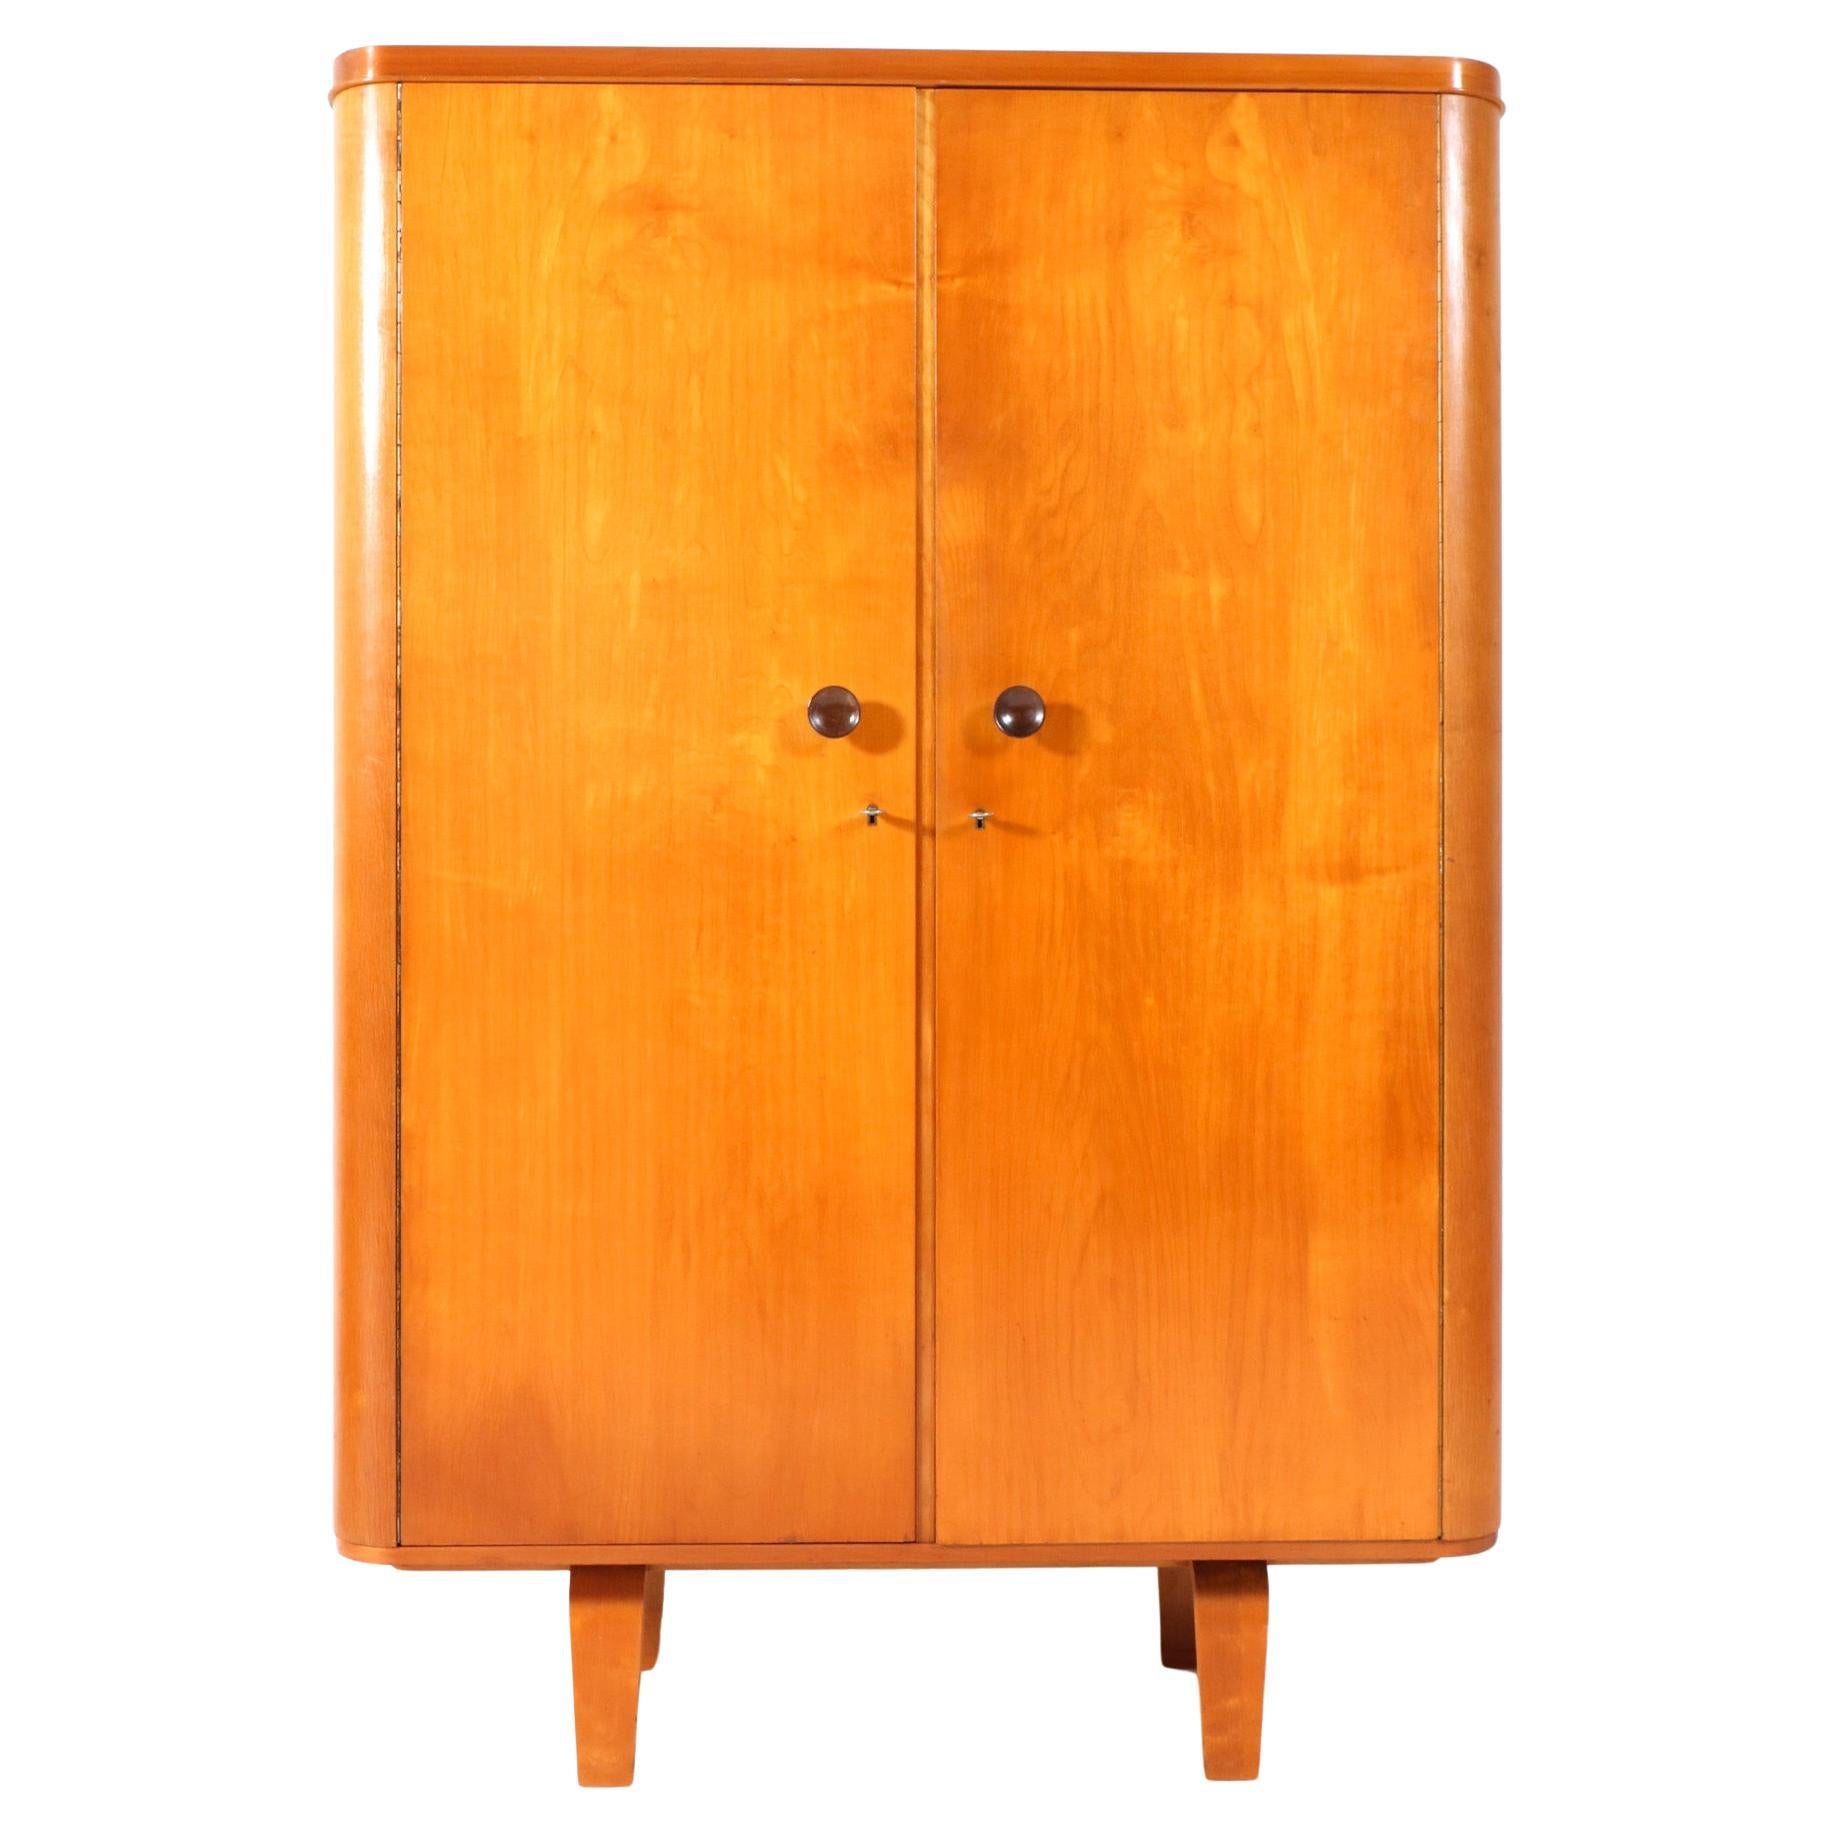 Birch Plywood Mid-Century Modern Armoire by Cor Alons for Den Boer Gouda, 1949 For Sale